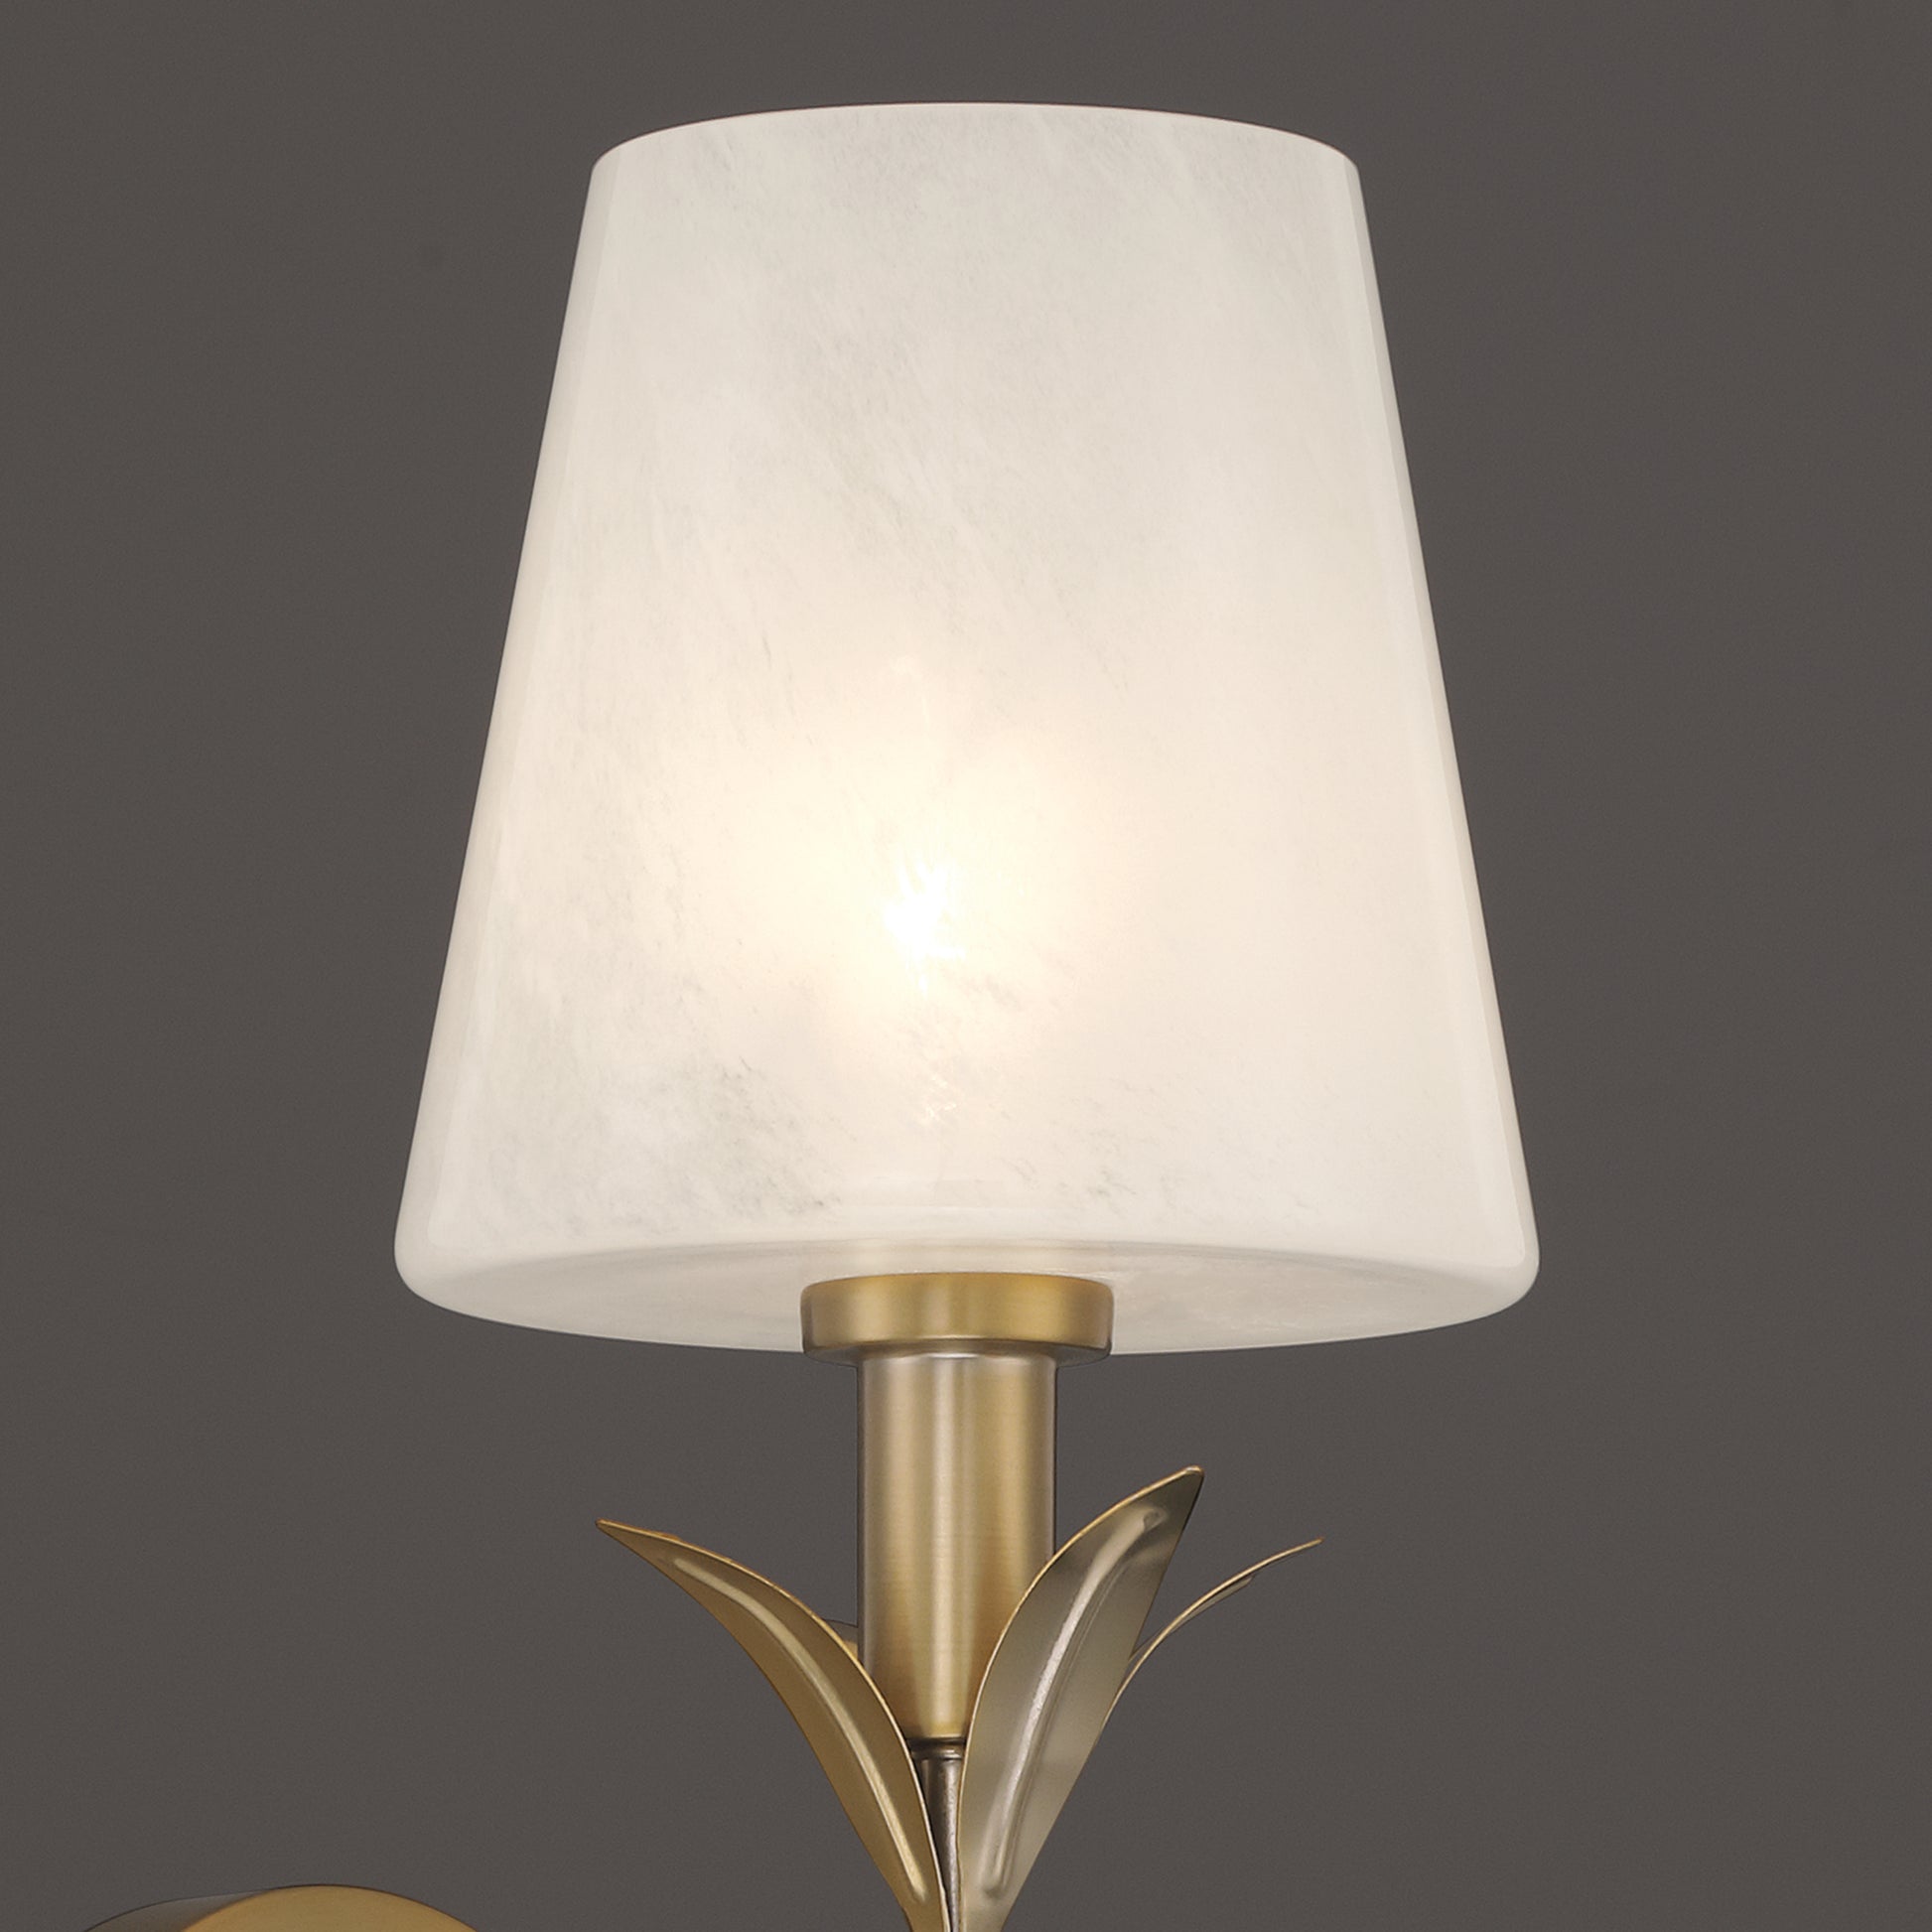 1 light vintage gold wallchiere (9) by ACROMA